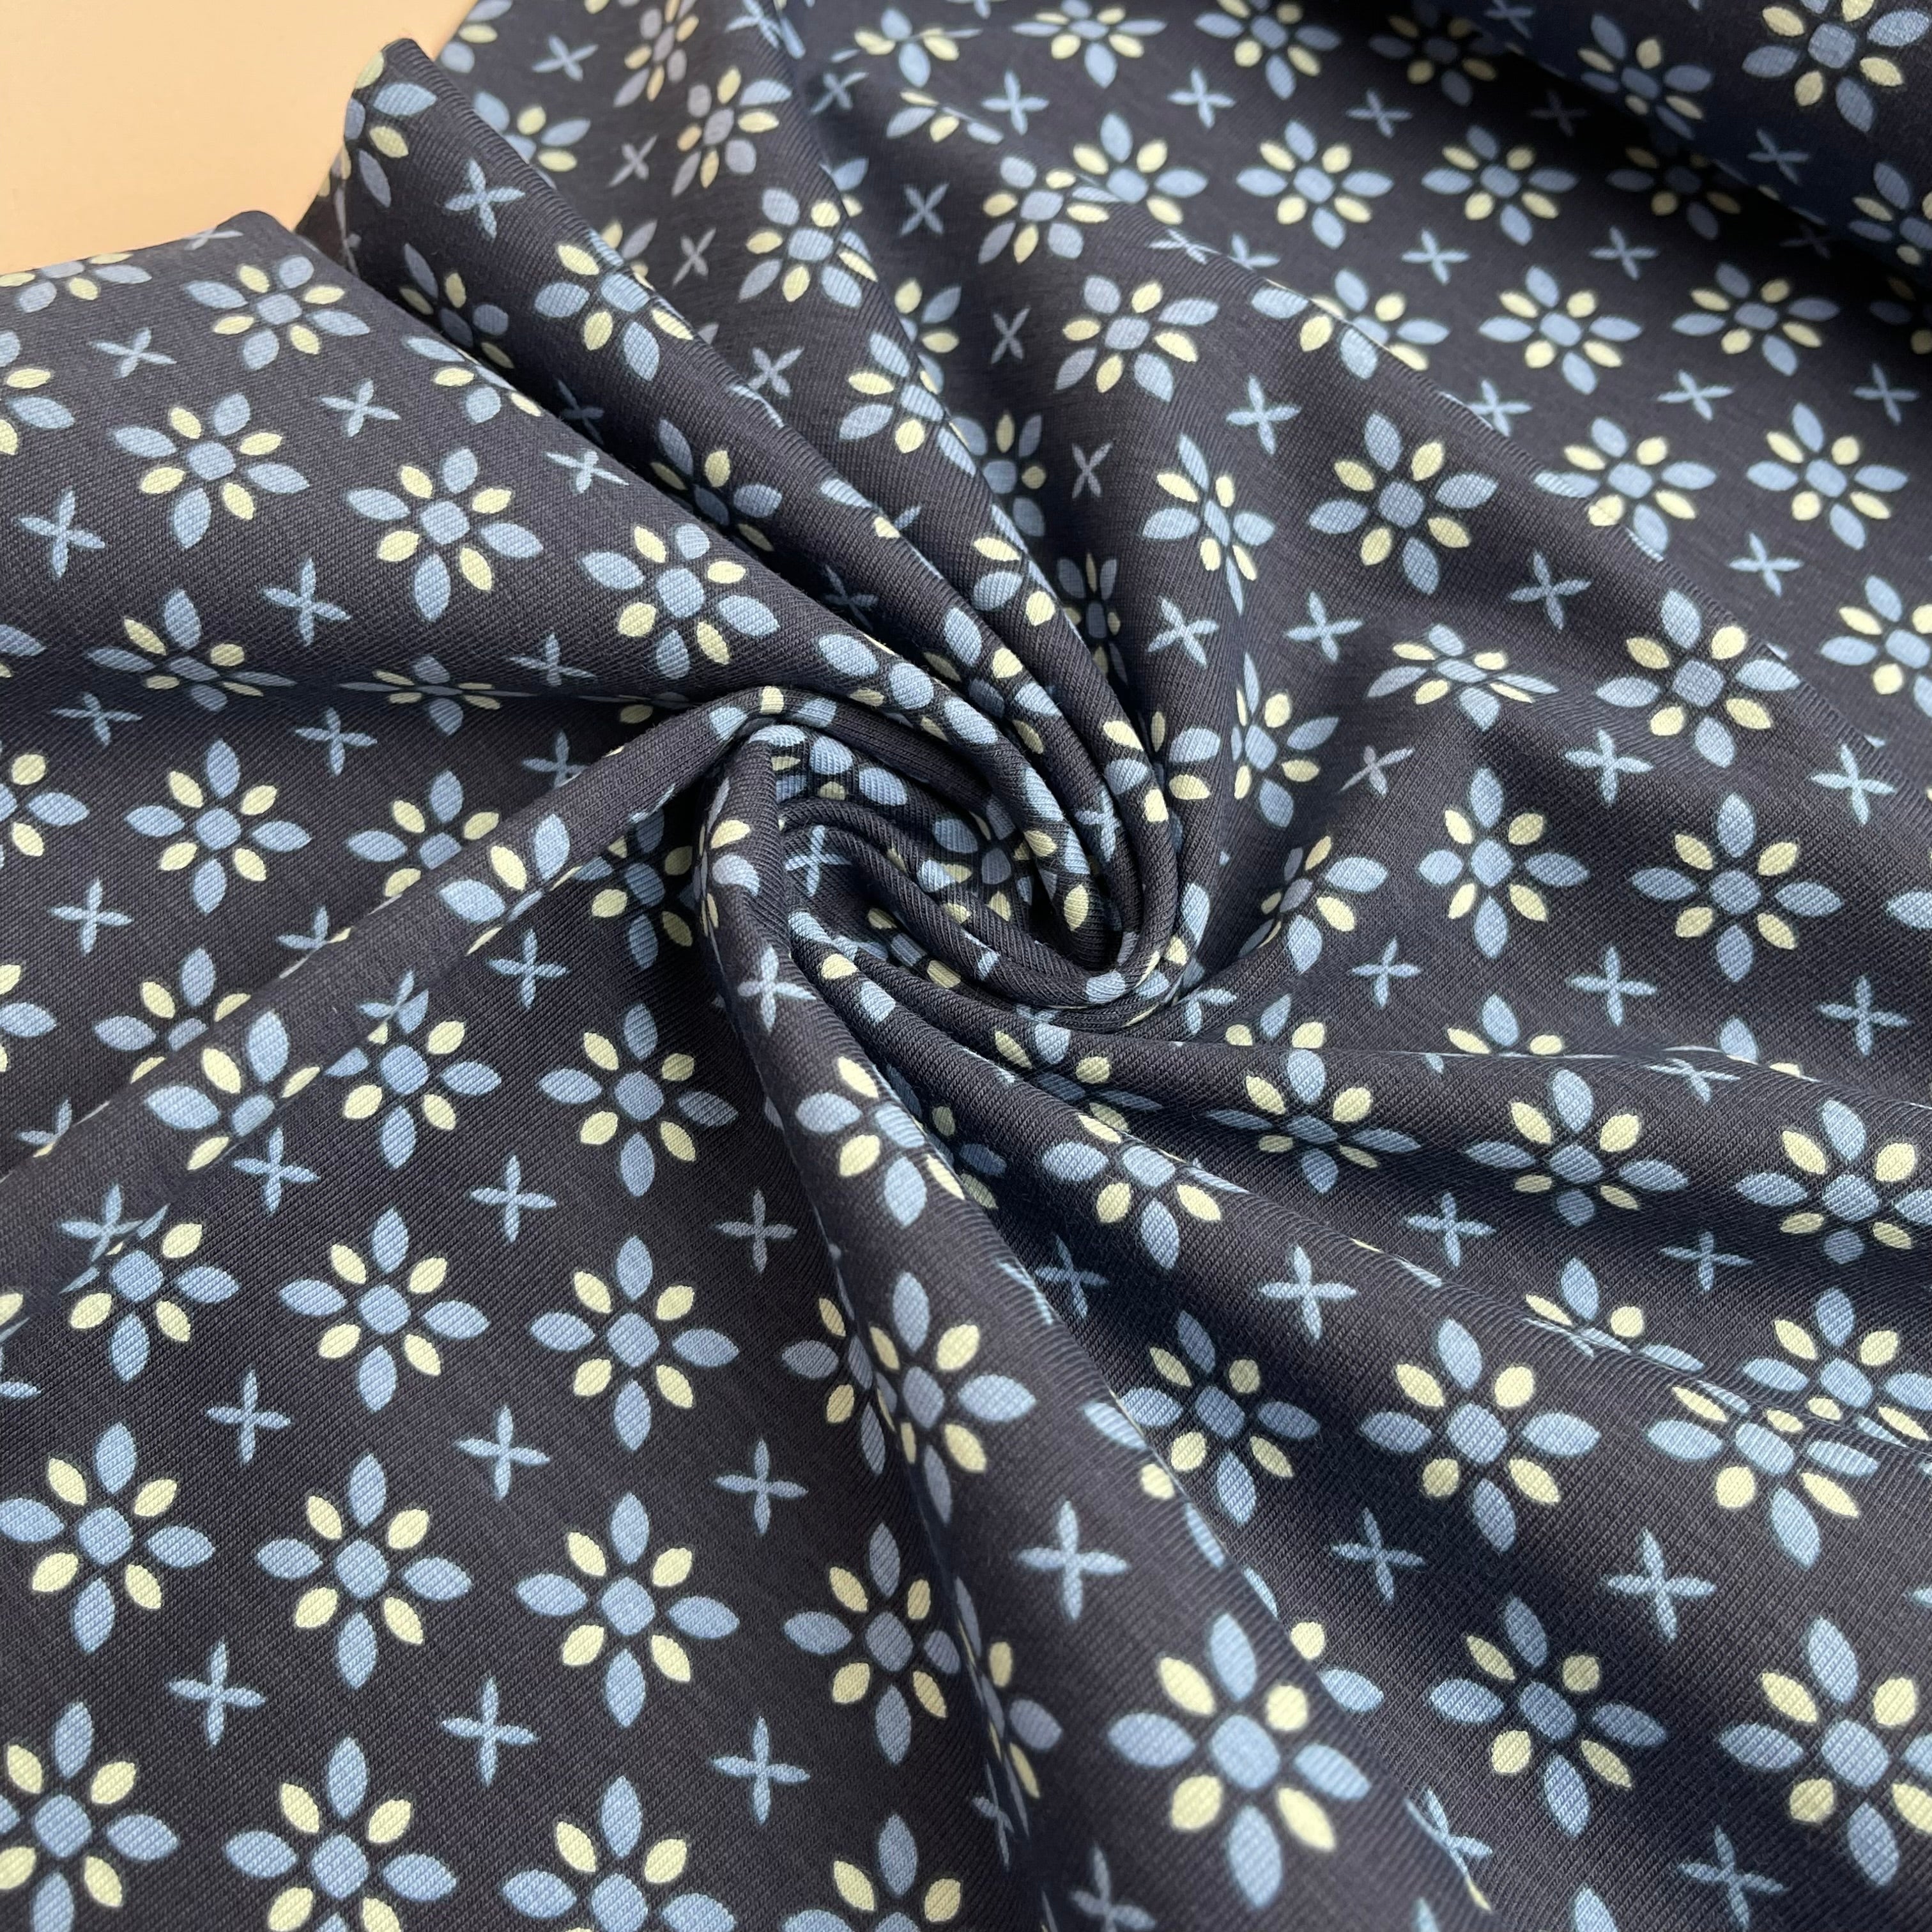 REMNANT 1.82 Metres - Graphic Flowers Navy Cotton Jersey